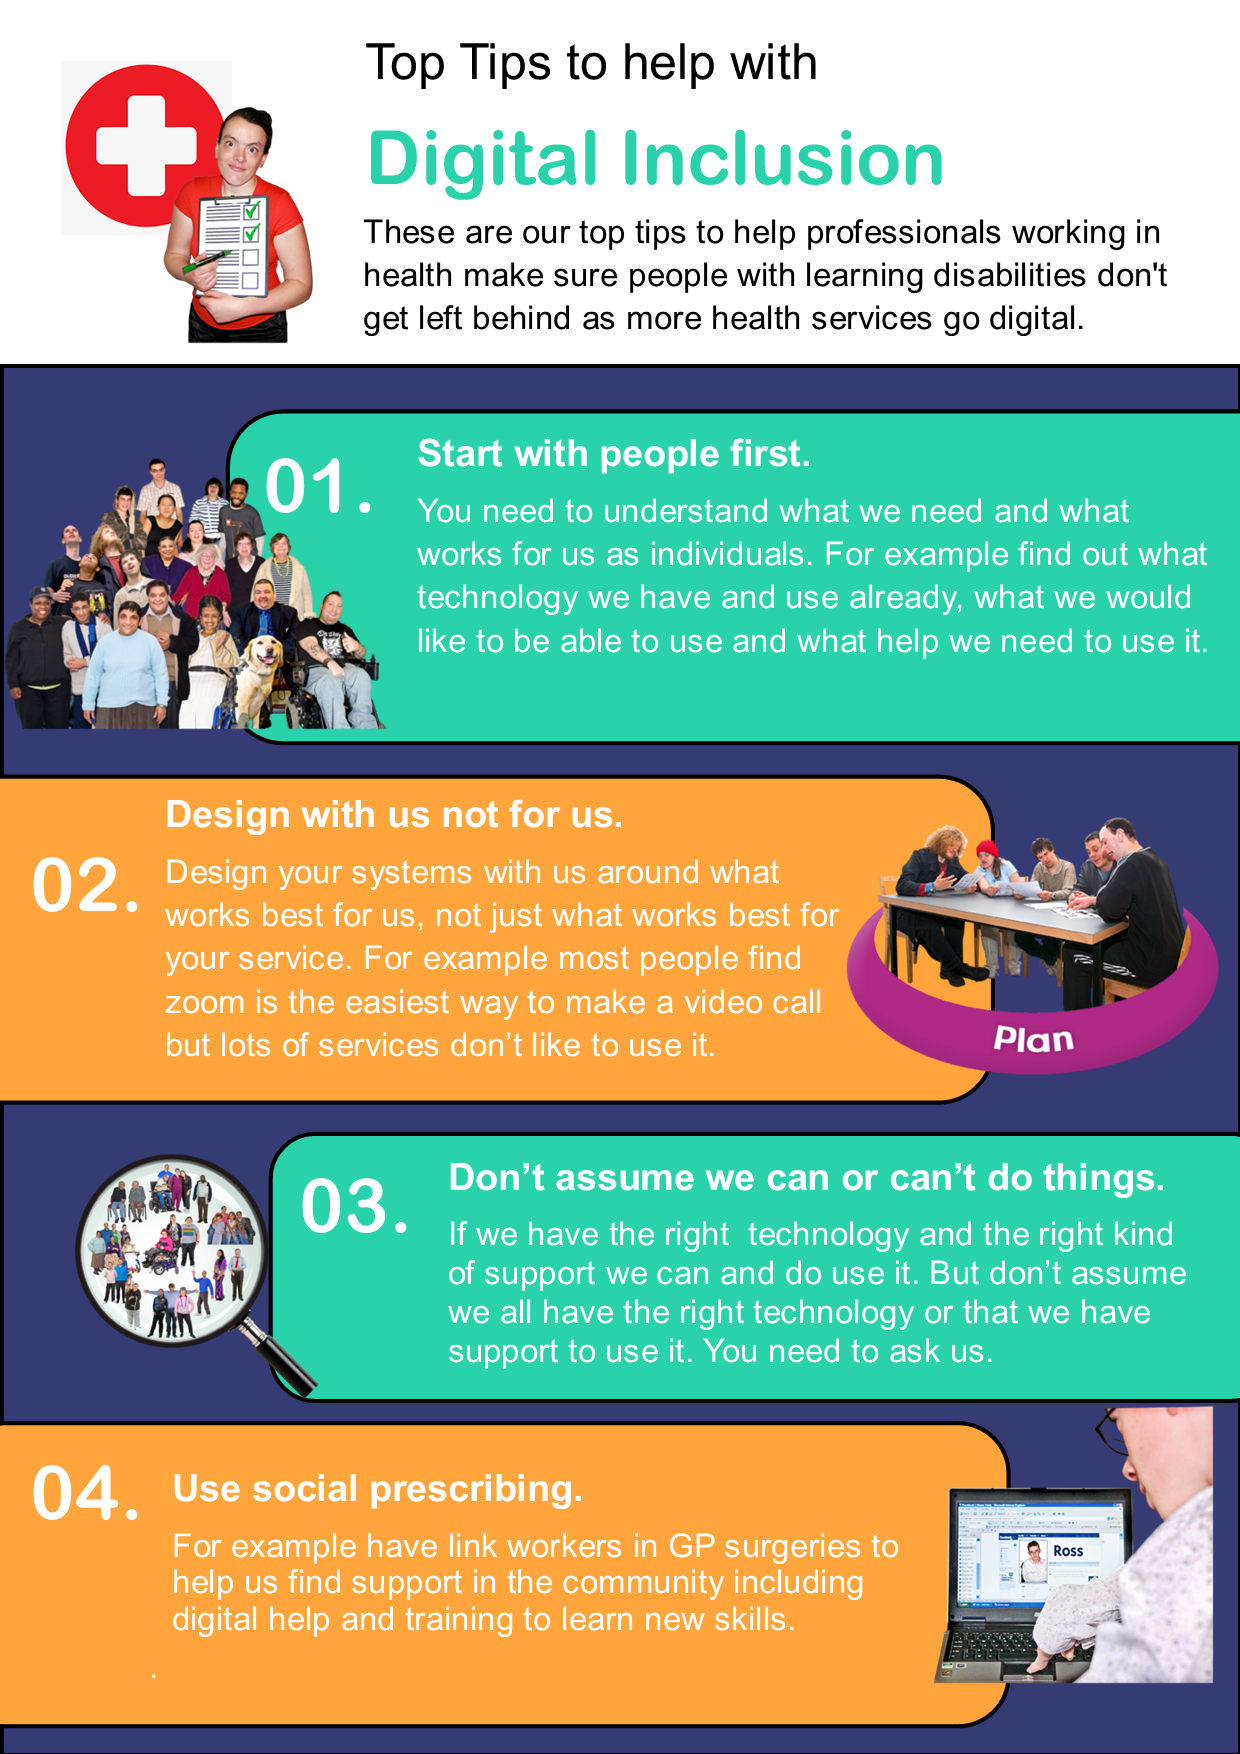 Top tips for digital inclusion 1 4